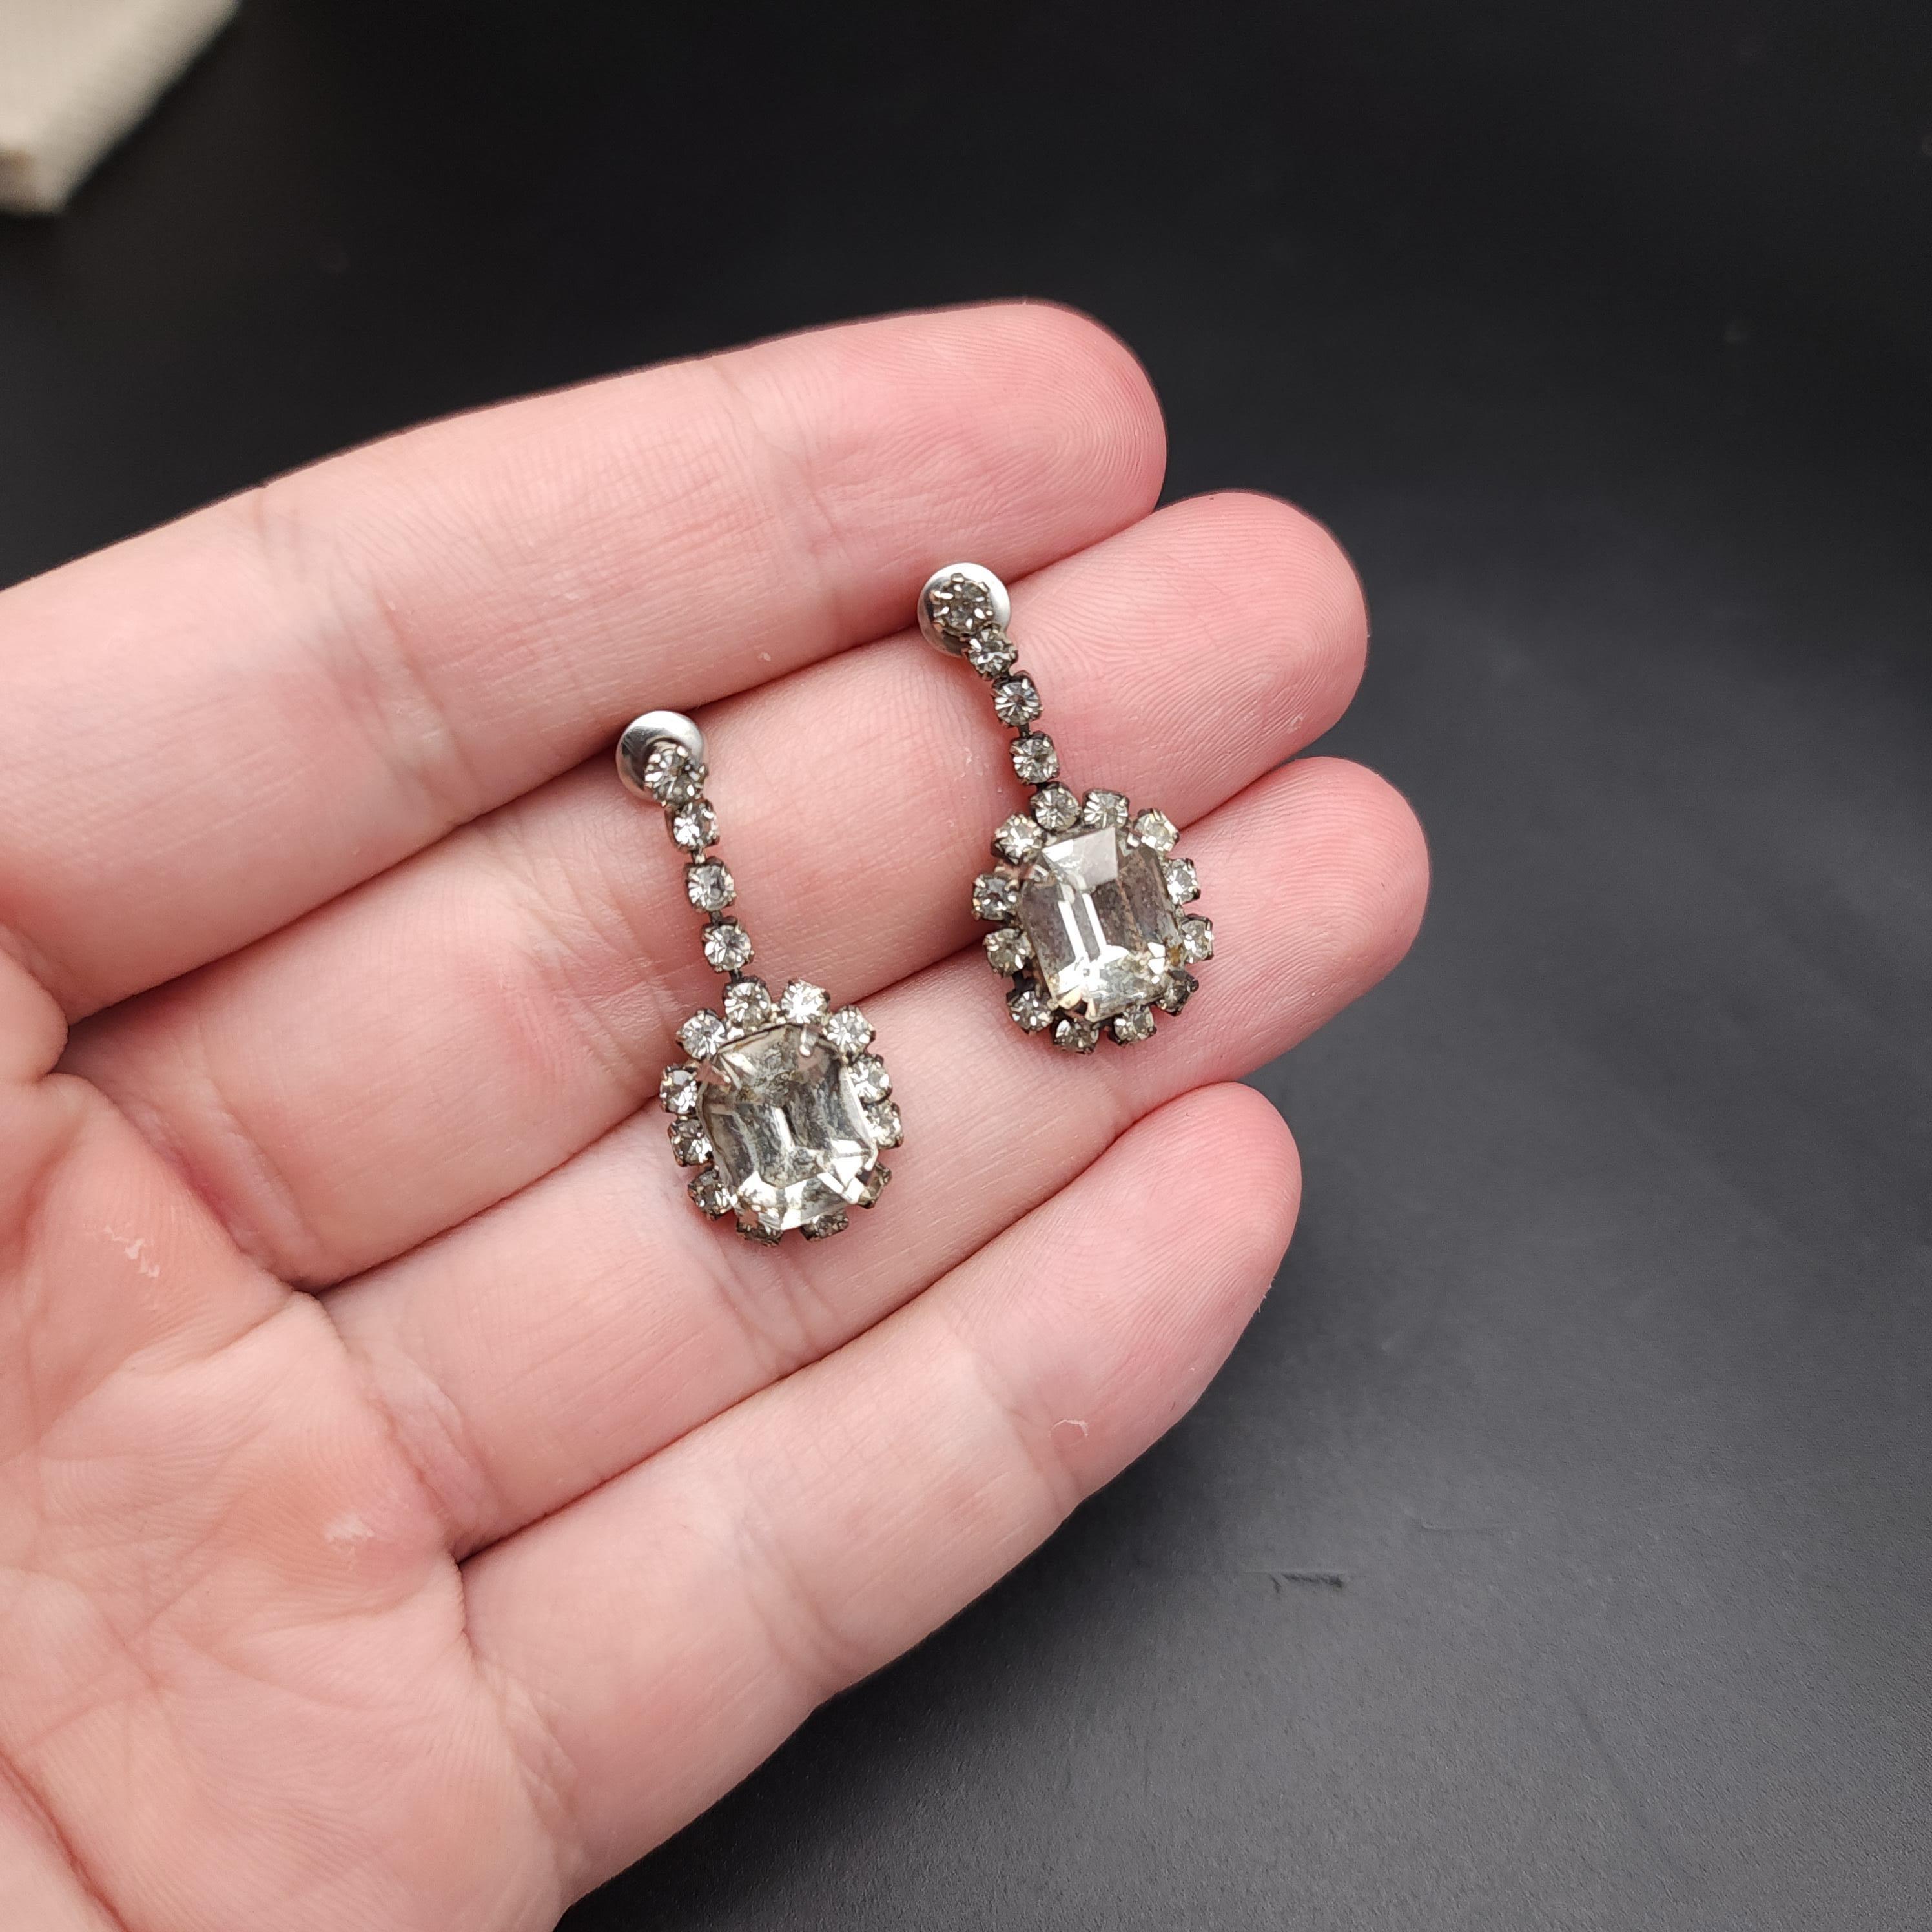 Retro Crystal Dangle Earrings, Square Cut Centerpiece, Prong-Set, Silver Tone In Excellent Condition For Sale In Milford, DE